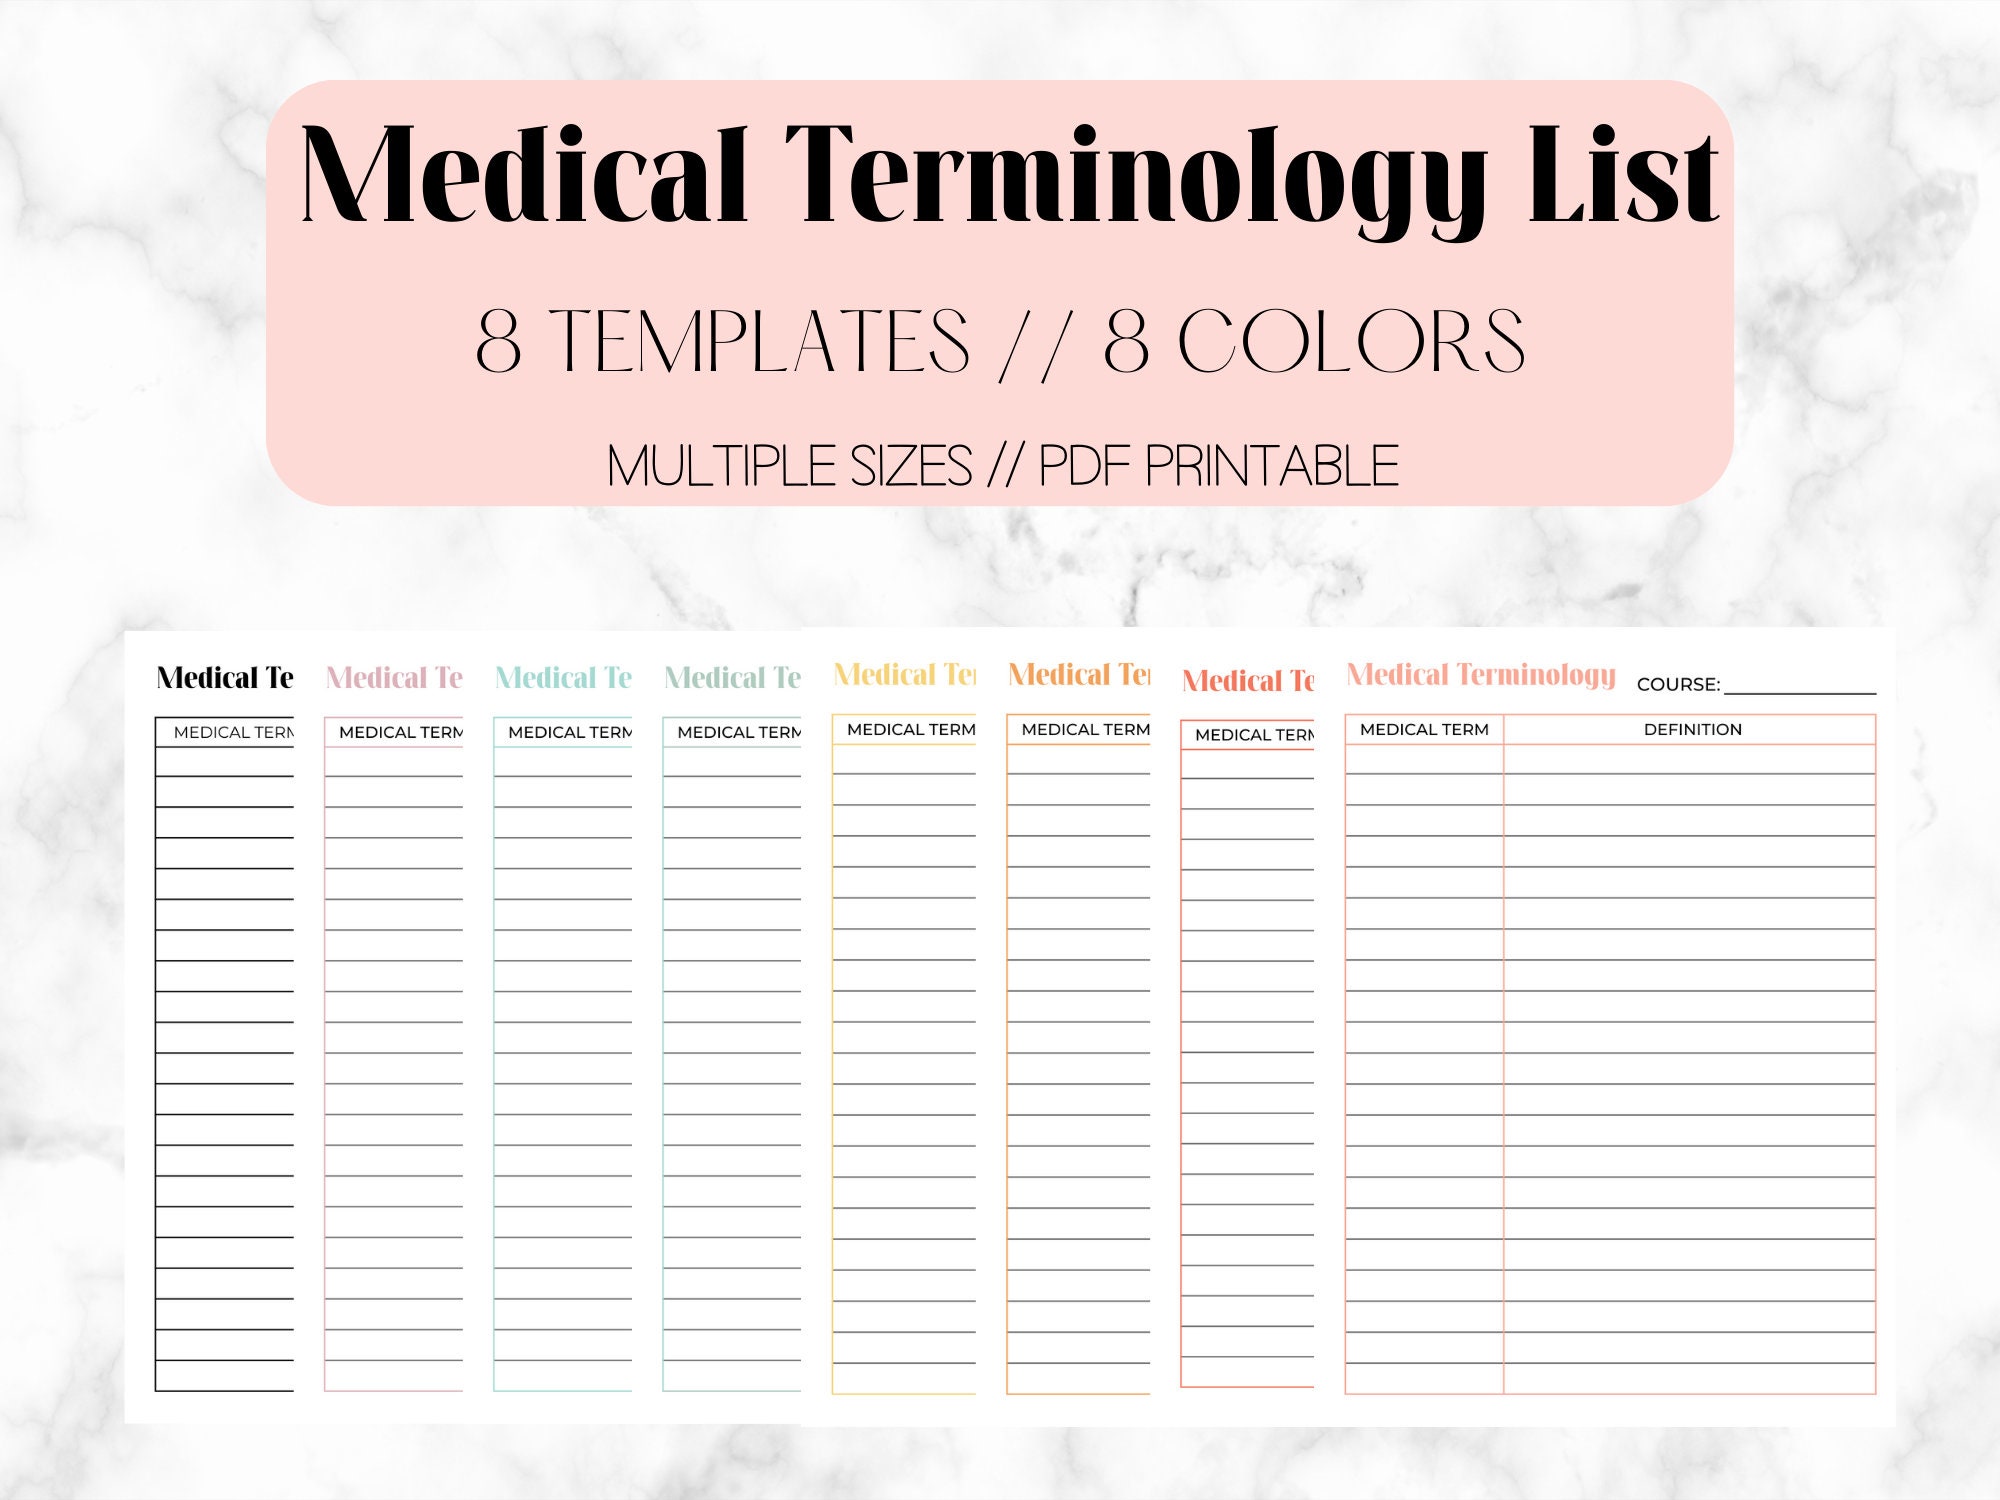 Medical Terminology List Medical Terminology Study Note Etsy